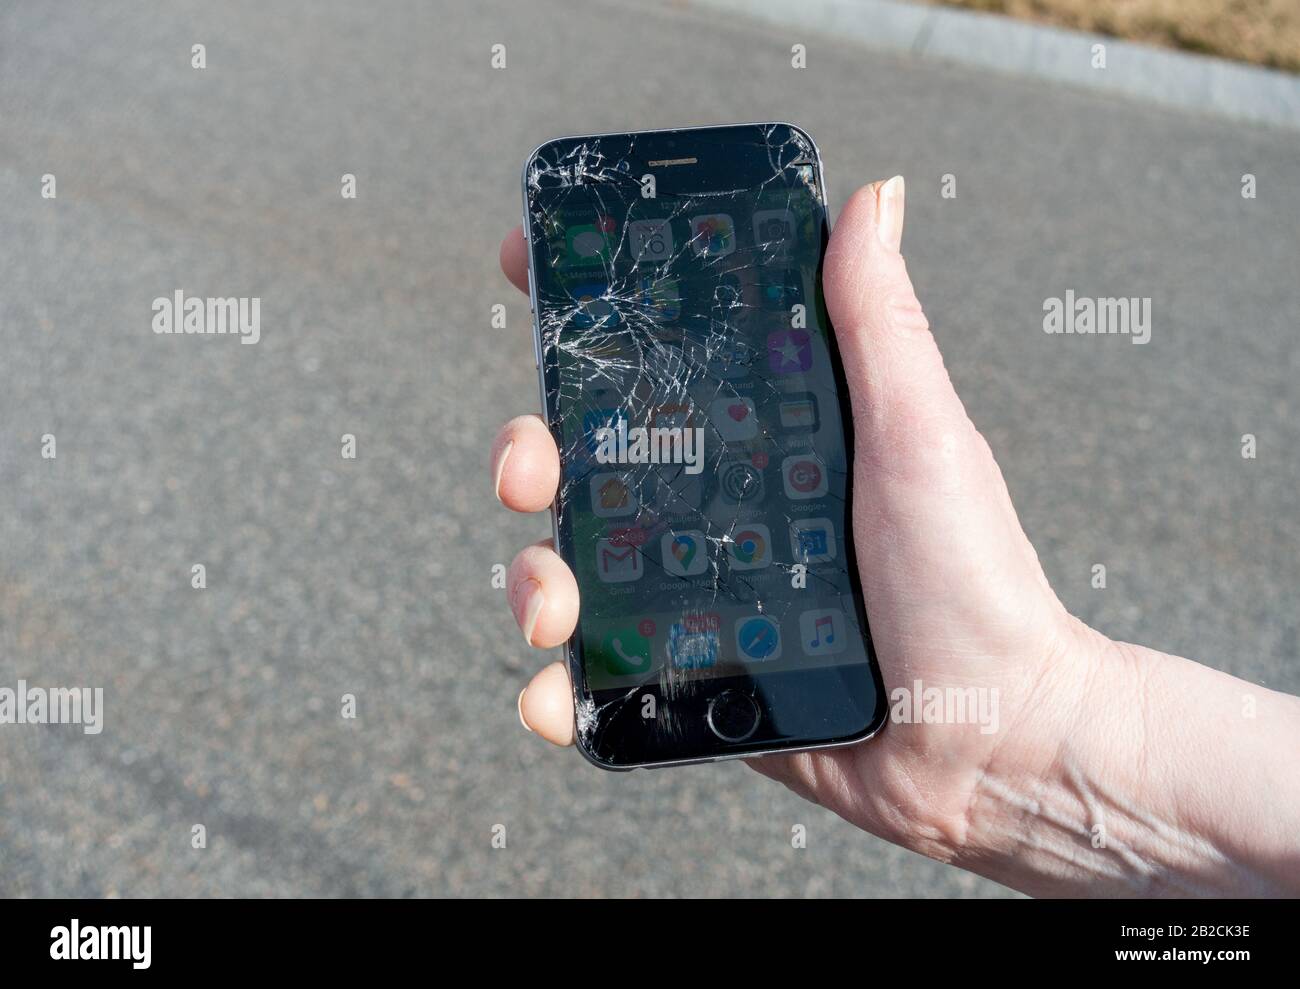 Iphone 6 with broken shattered glass screen from dropping on asphalt pavement Stock Photo